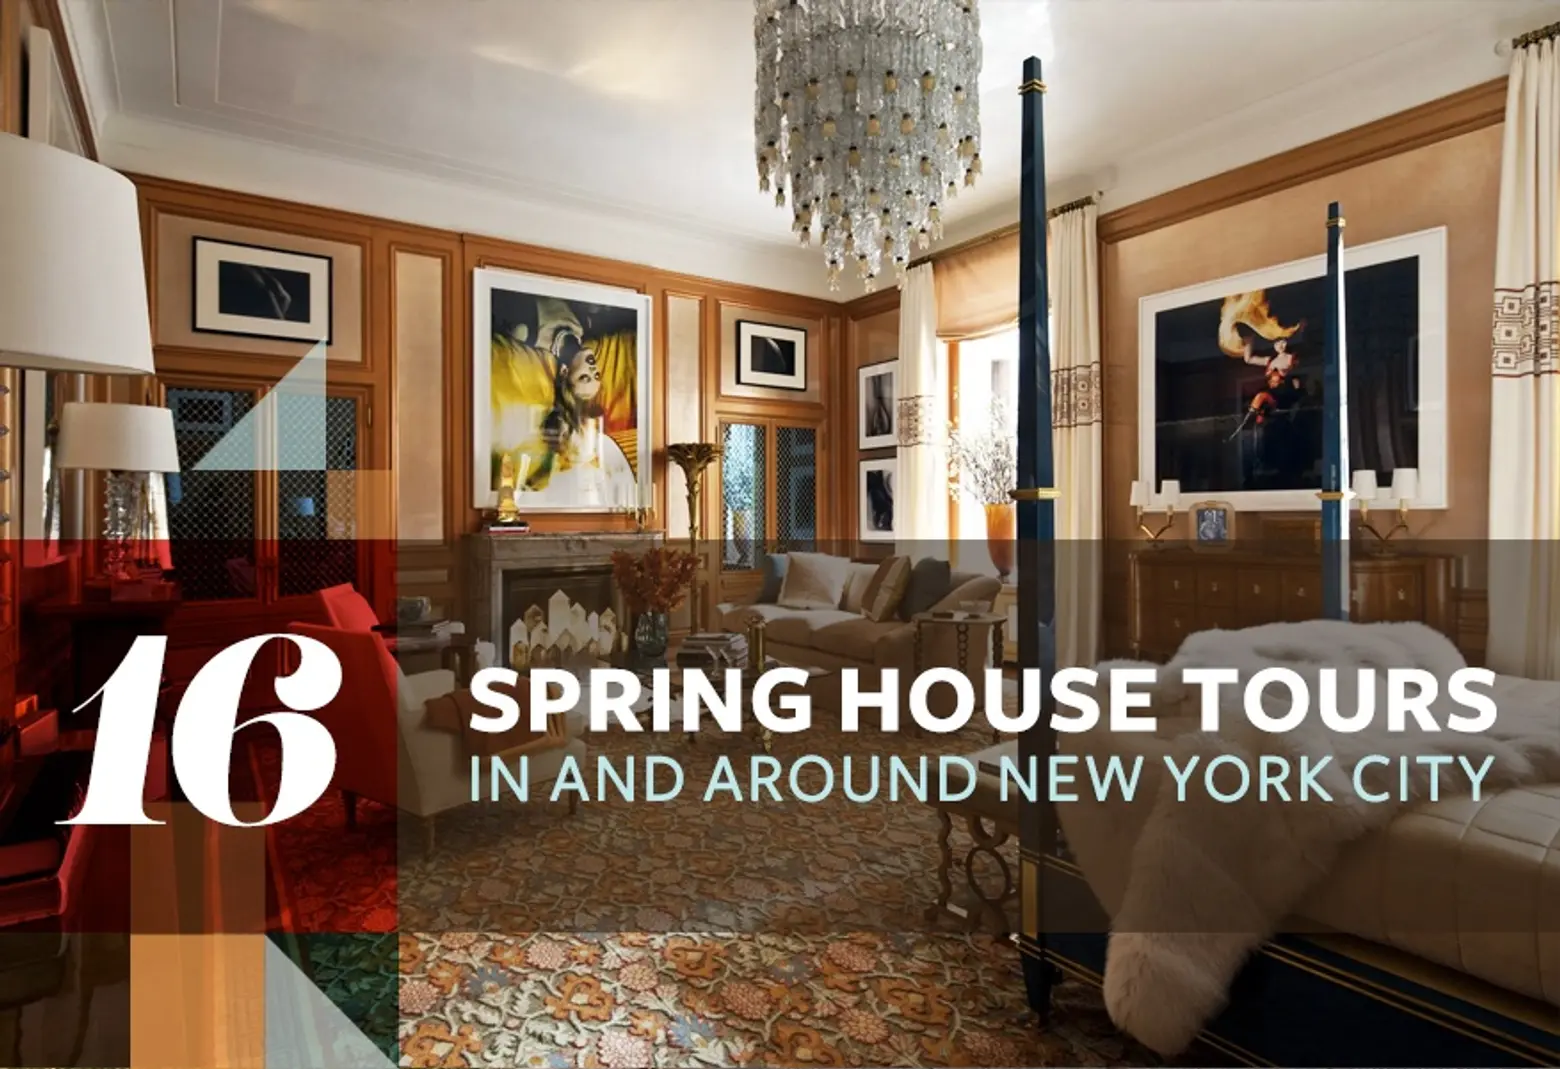 16 spring house tours to check out in and around NYC